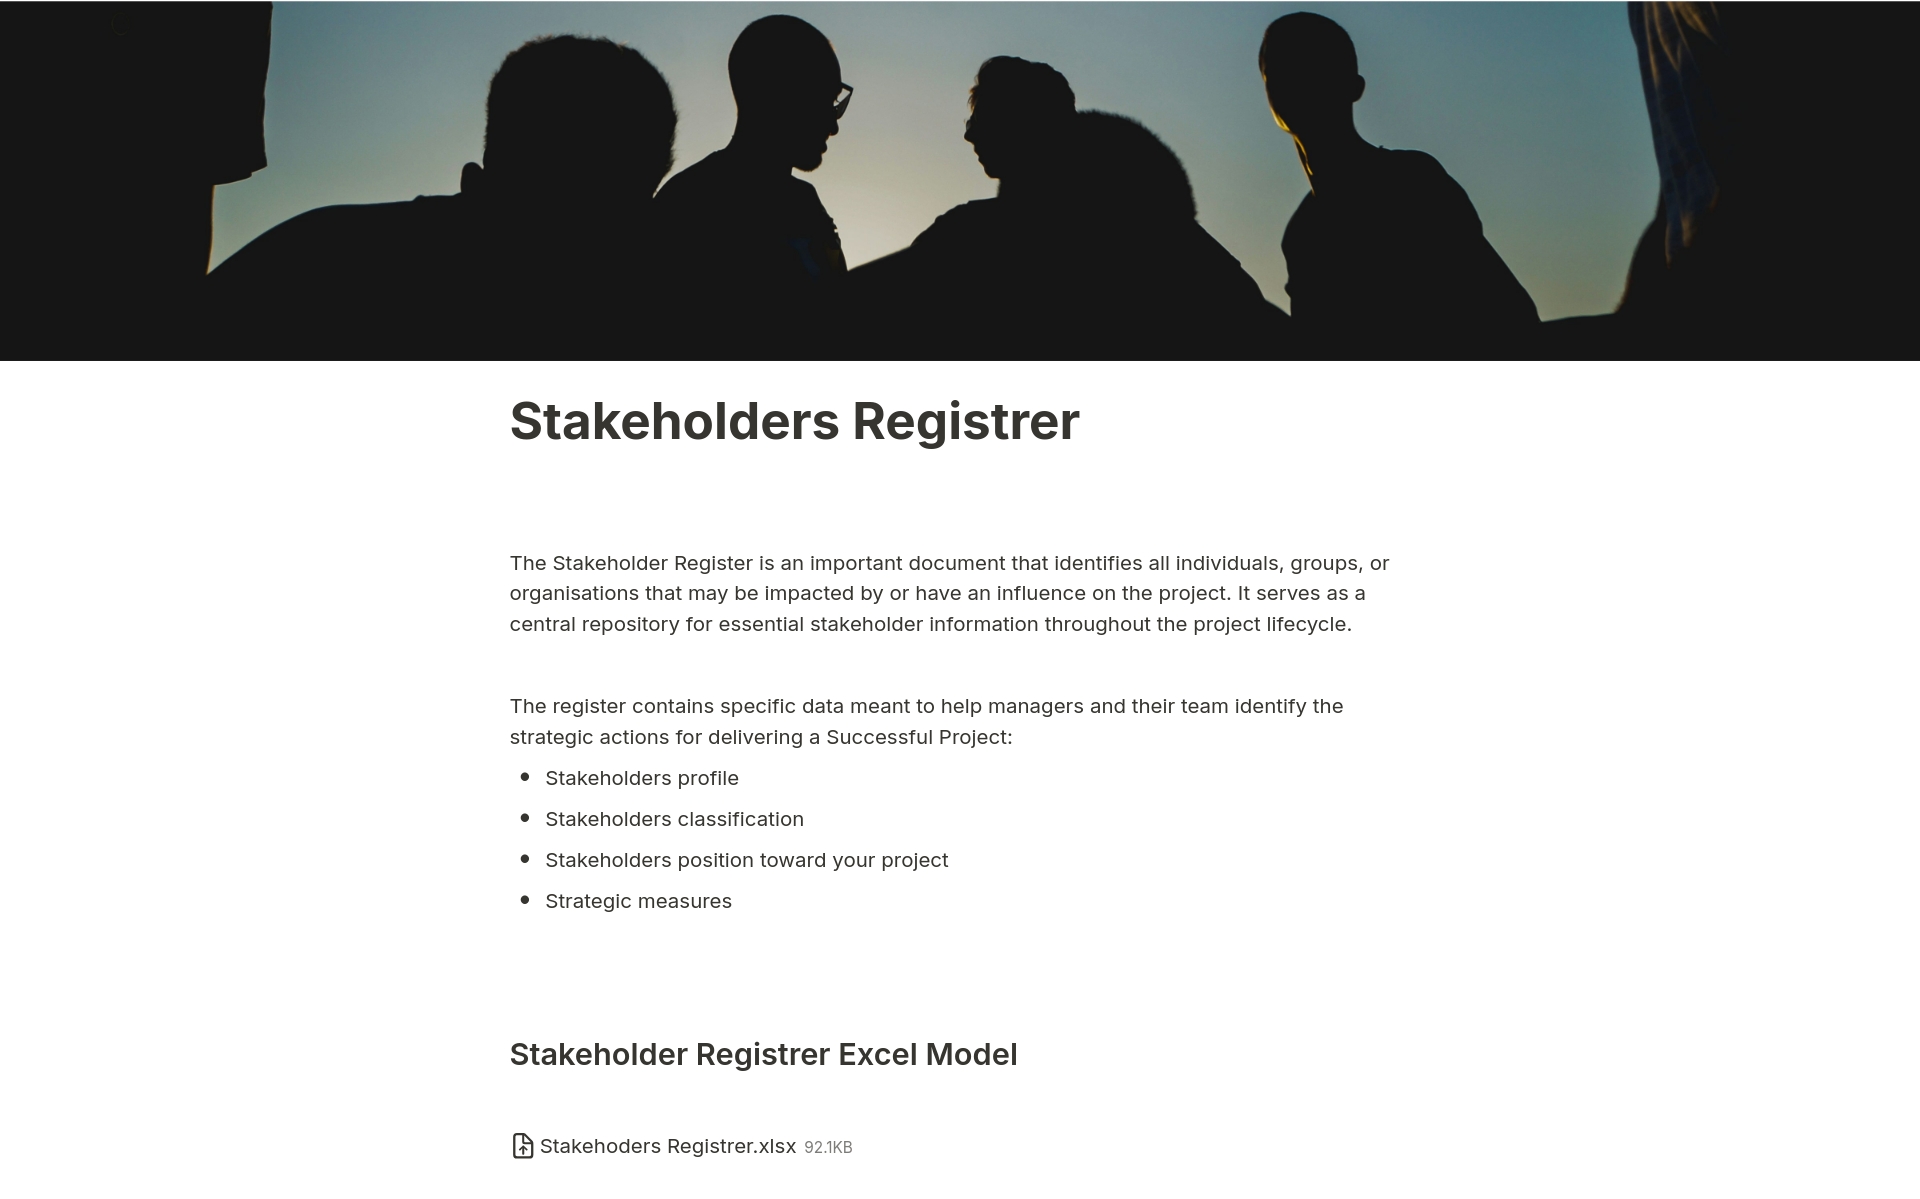 This Stakeholders Registrer is an essential document aiding managers and their teams in discerning strategic steps towards project success.

